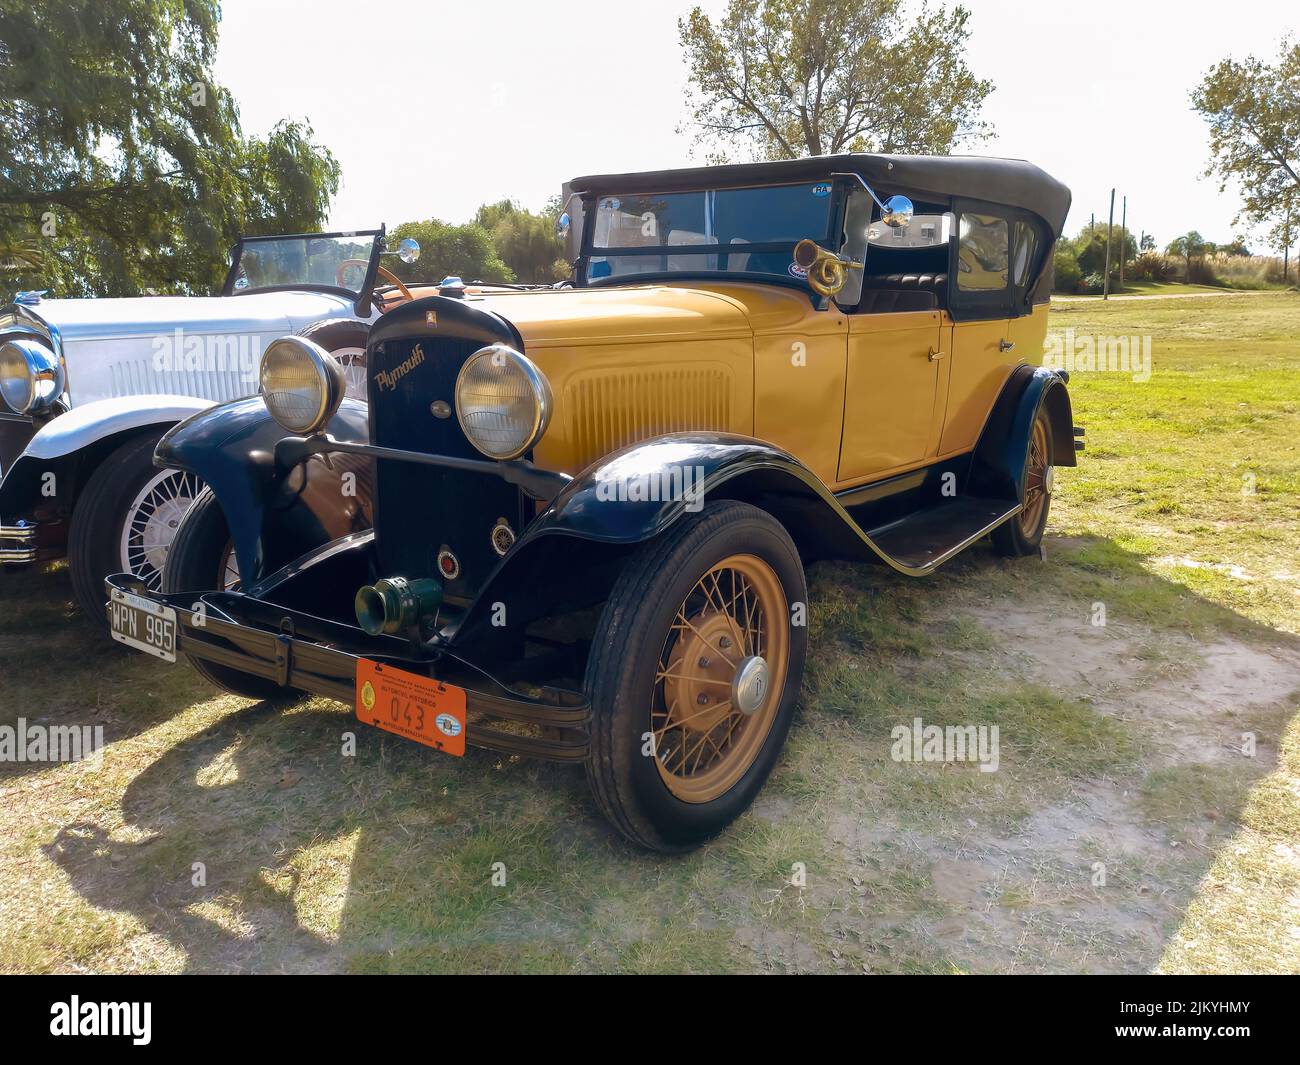 Chascomus, Argentina - Apr 9, 2022: Old yellow Chrysler Plymouth phaeton four door circa 1930 parked in the countryside. Nature grass and trees backgr Stock Photo